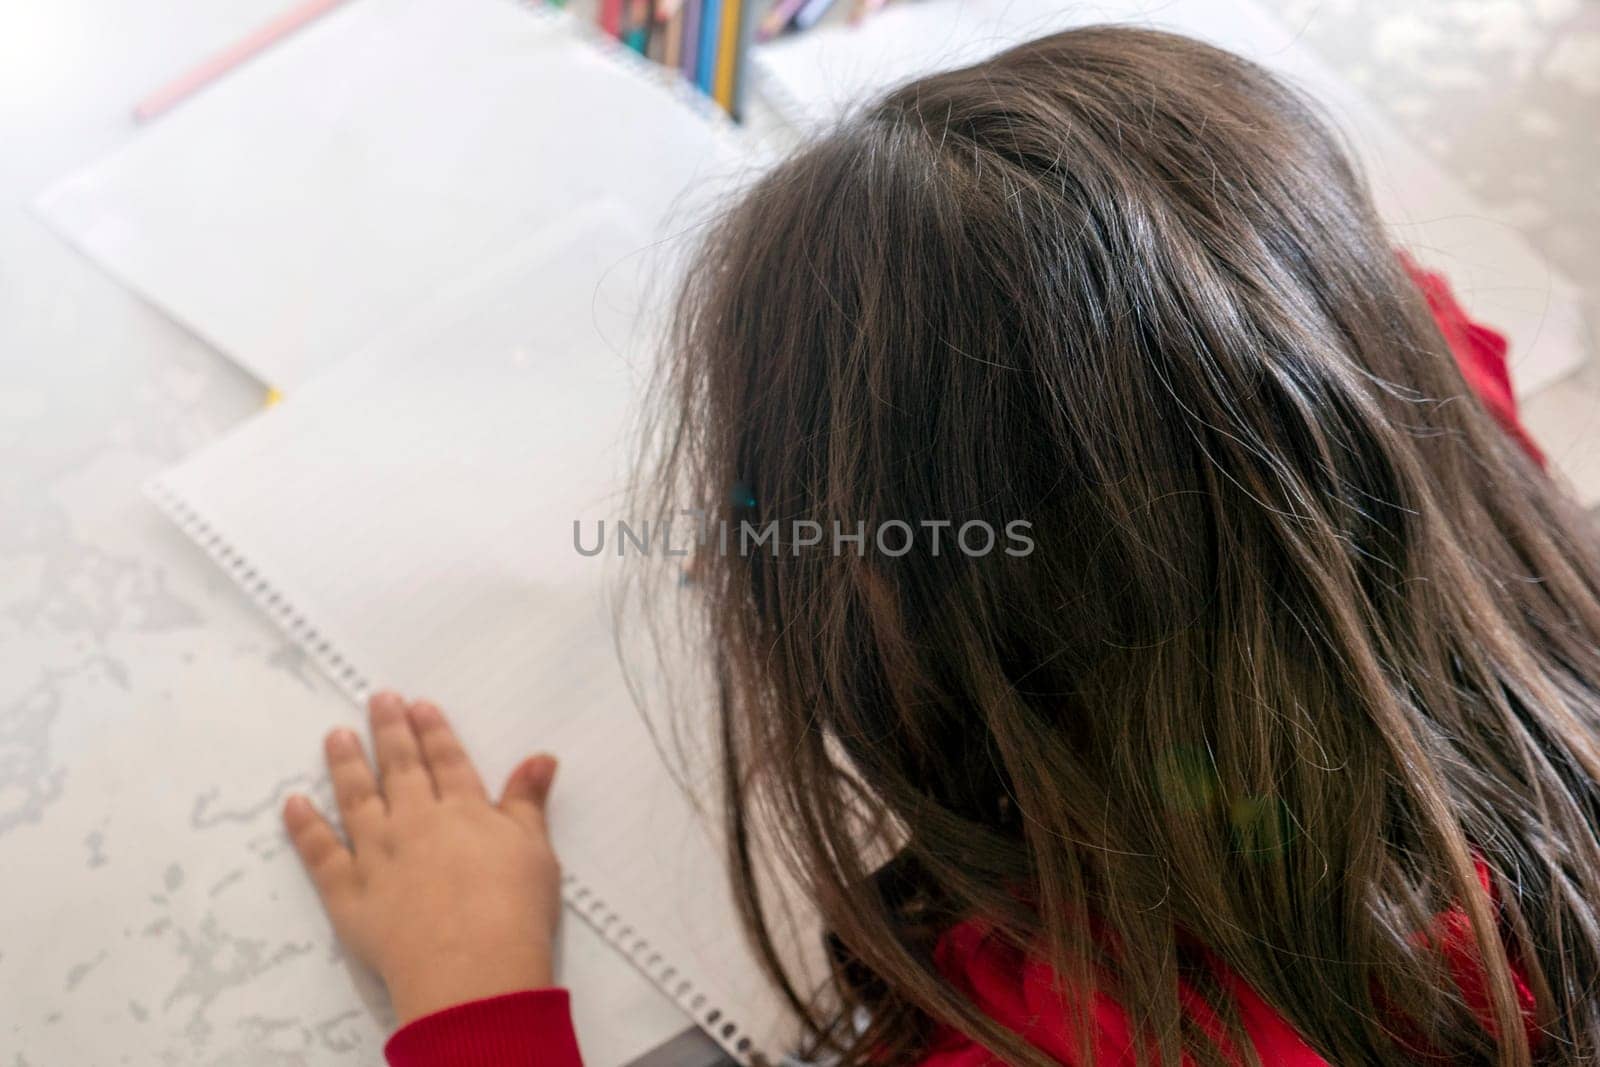 little girl coloring with crayons at the table,close-up of kindergarten kids coloring,